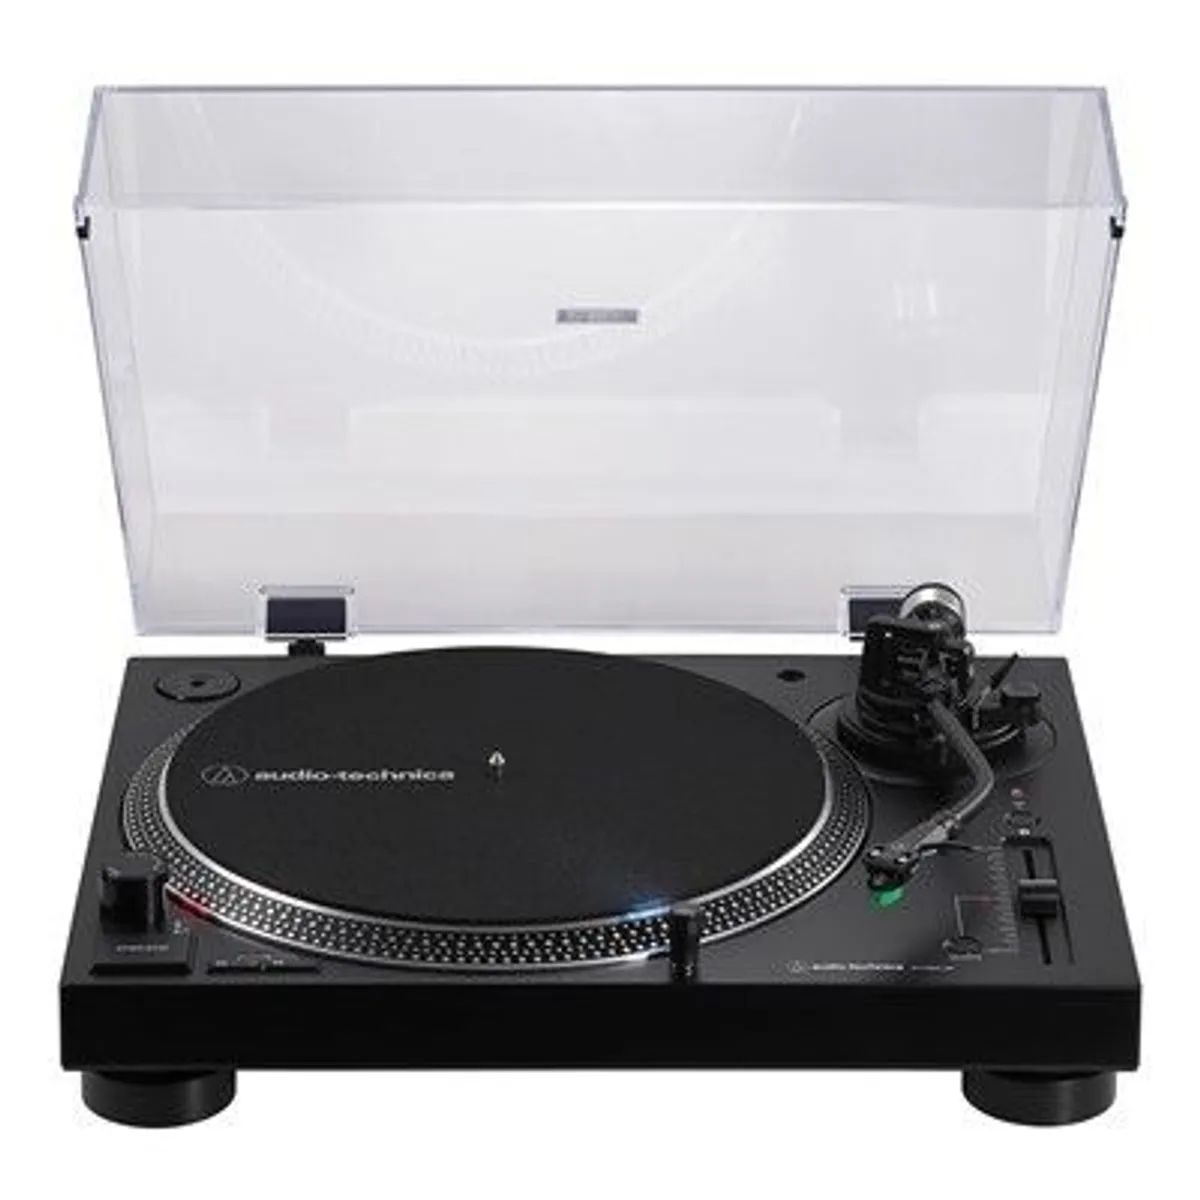 Audio Technica Turntable Bluetooth Record Player - Image 1